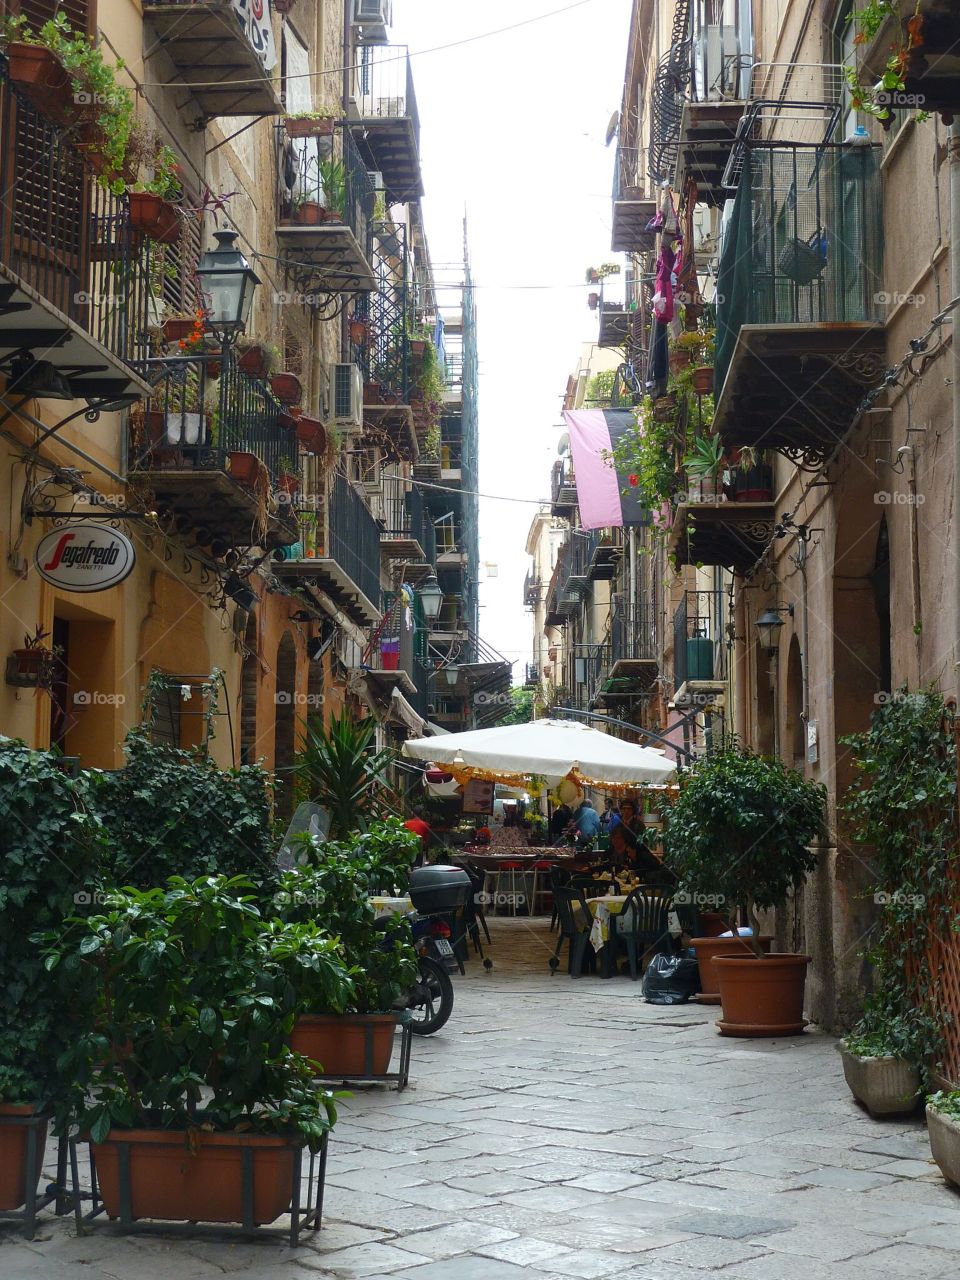 Streets of Palermo 